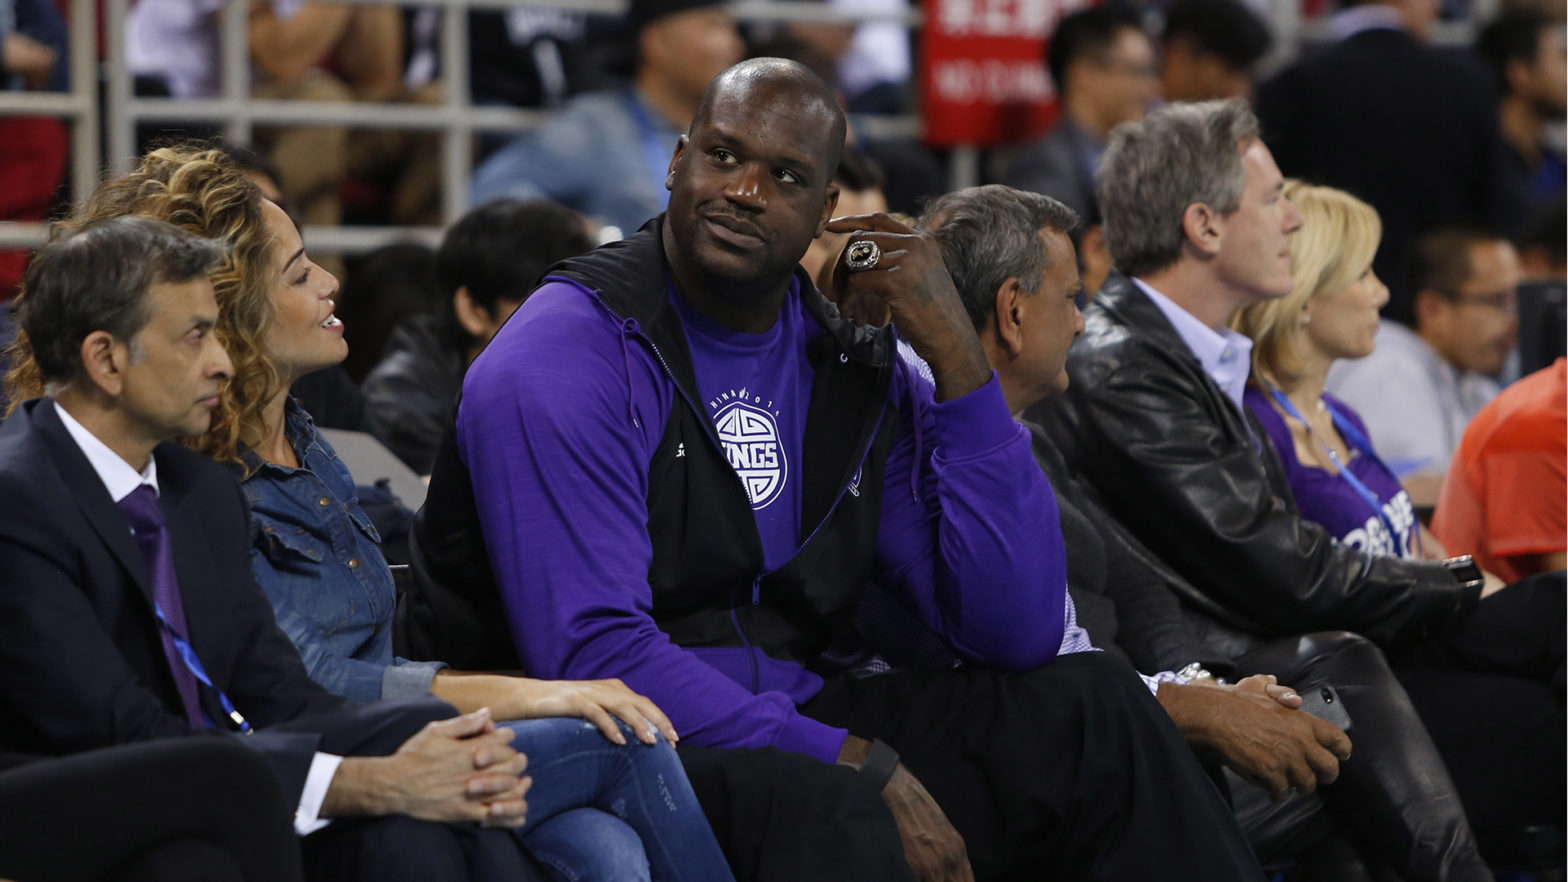 Shaquille O'Neal Finalizes The Sale Of His Ownership Stake In The Sacramento Kings